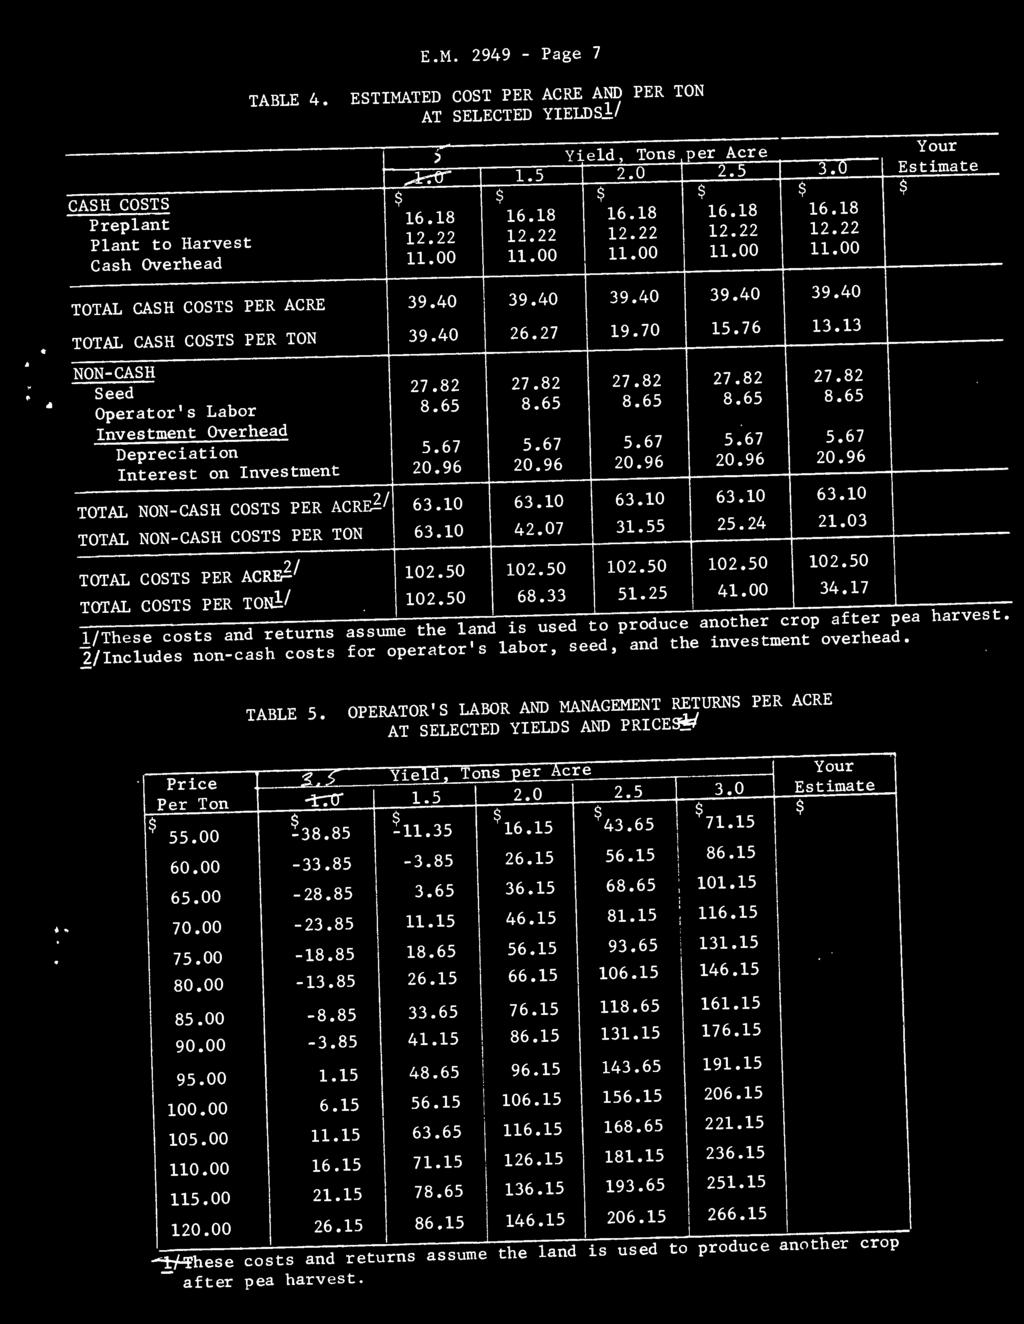 17 1/These costs and returns assume the land s used to produce another crop after pea harvest. l/ncludes non-cash costs for operator's labor, seed, and the nvestment overhead. TABLE 5.